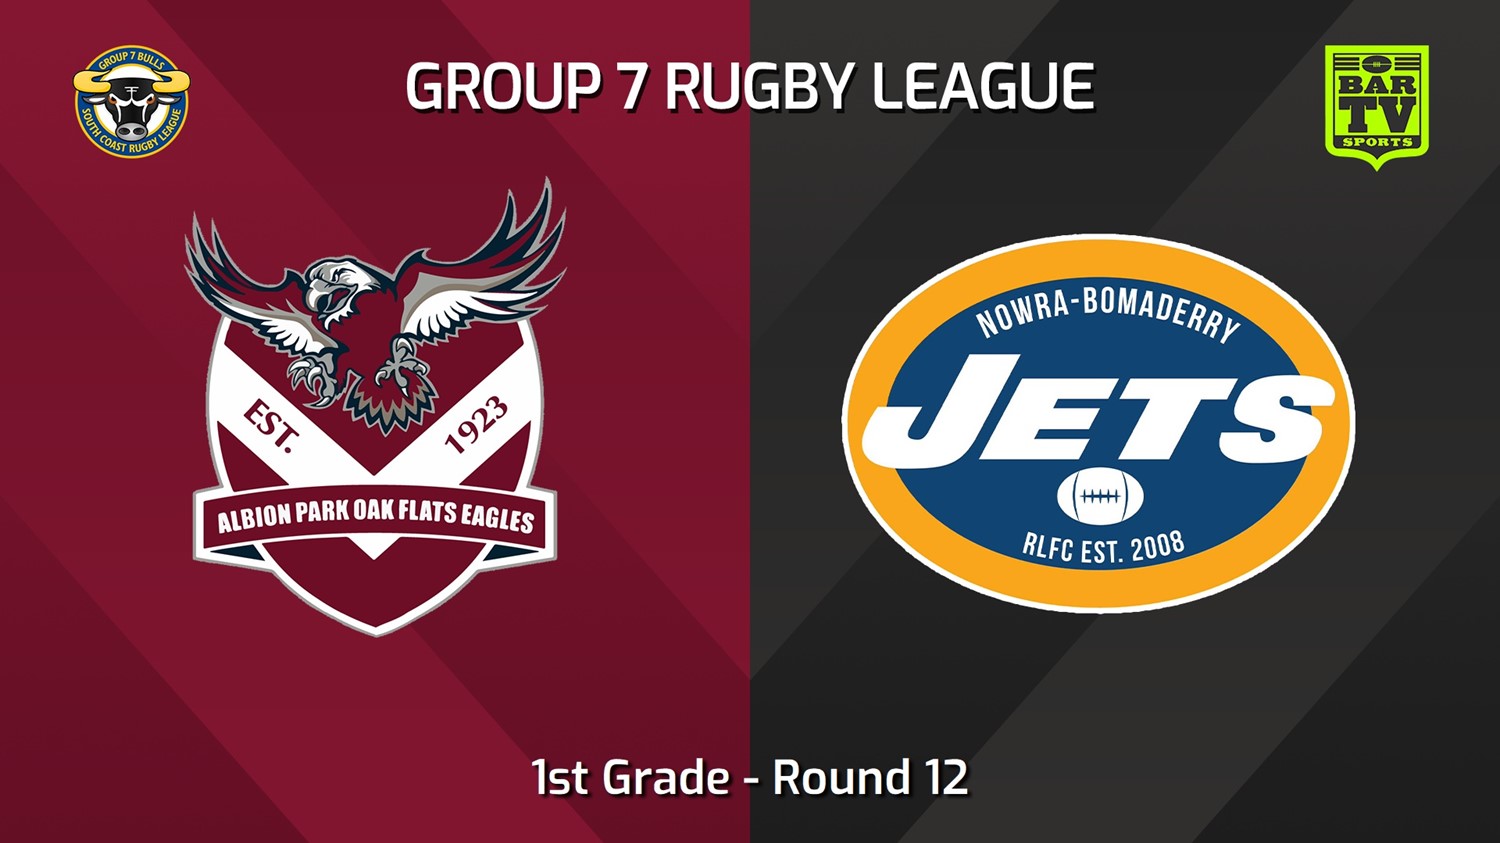 240630-video-South Coast Round 12 - 1st Grade - Albion Park Oak Flats Eagles v Nowra-Bomaderry Jets Minigame Slate Image